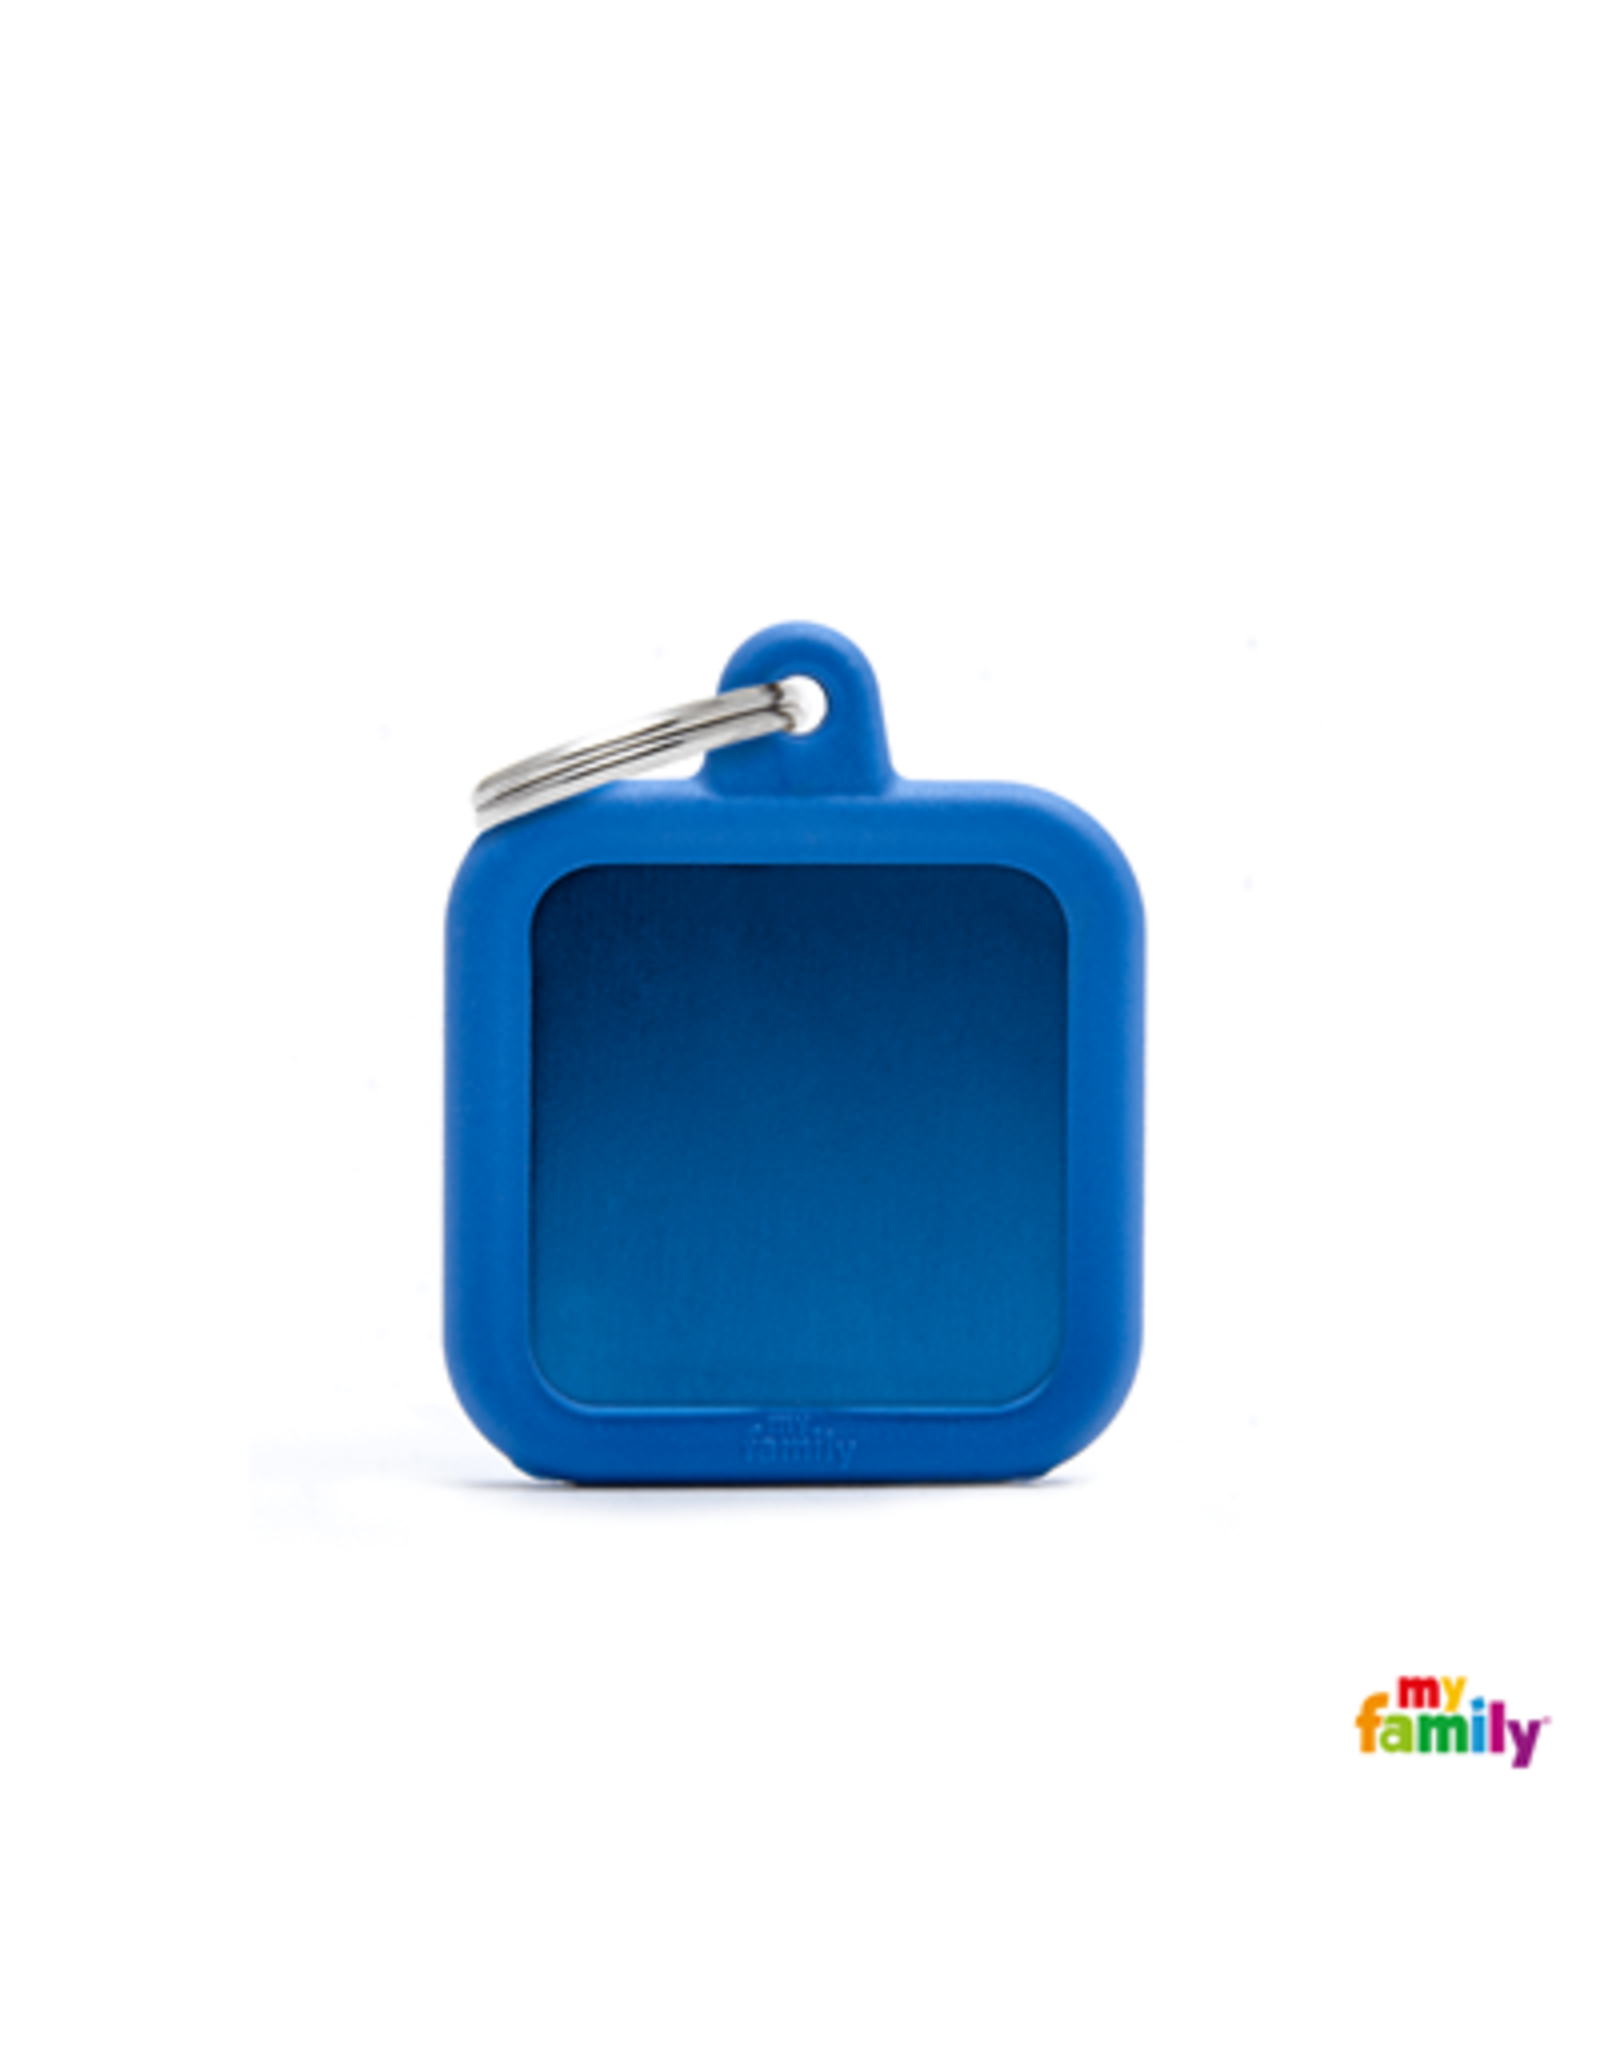 MyFamily Tag - Square Blue Rubber